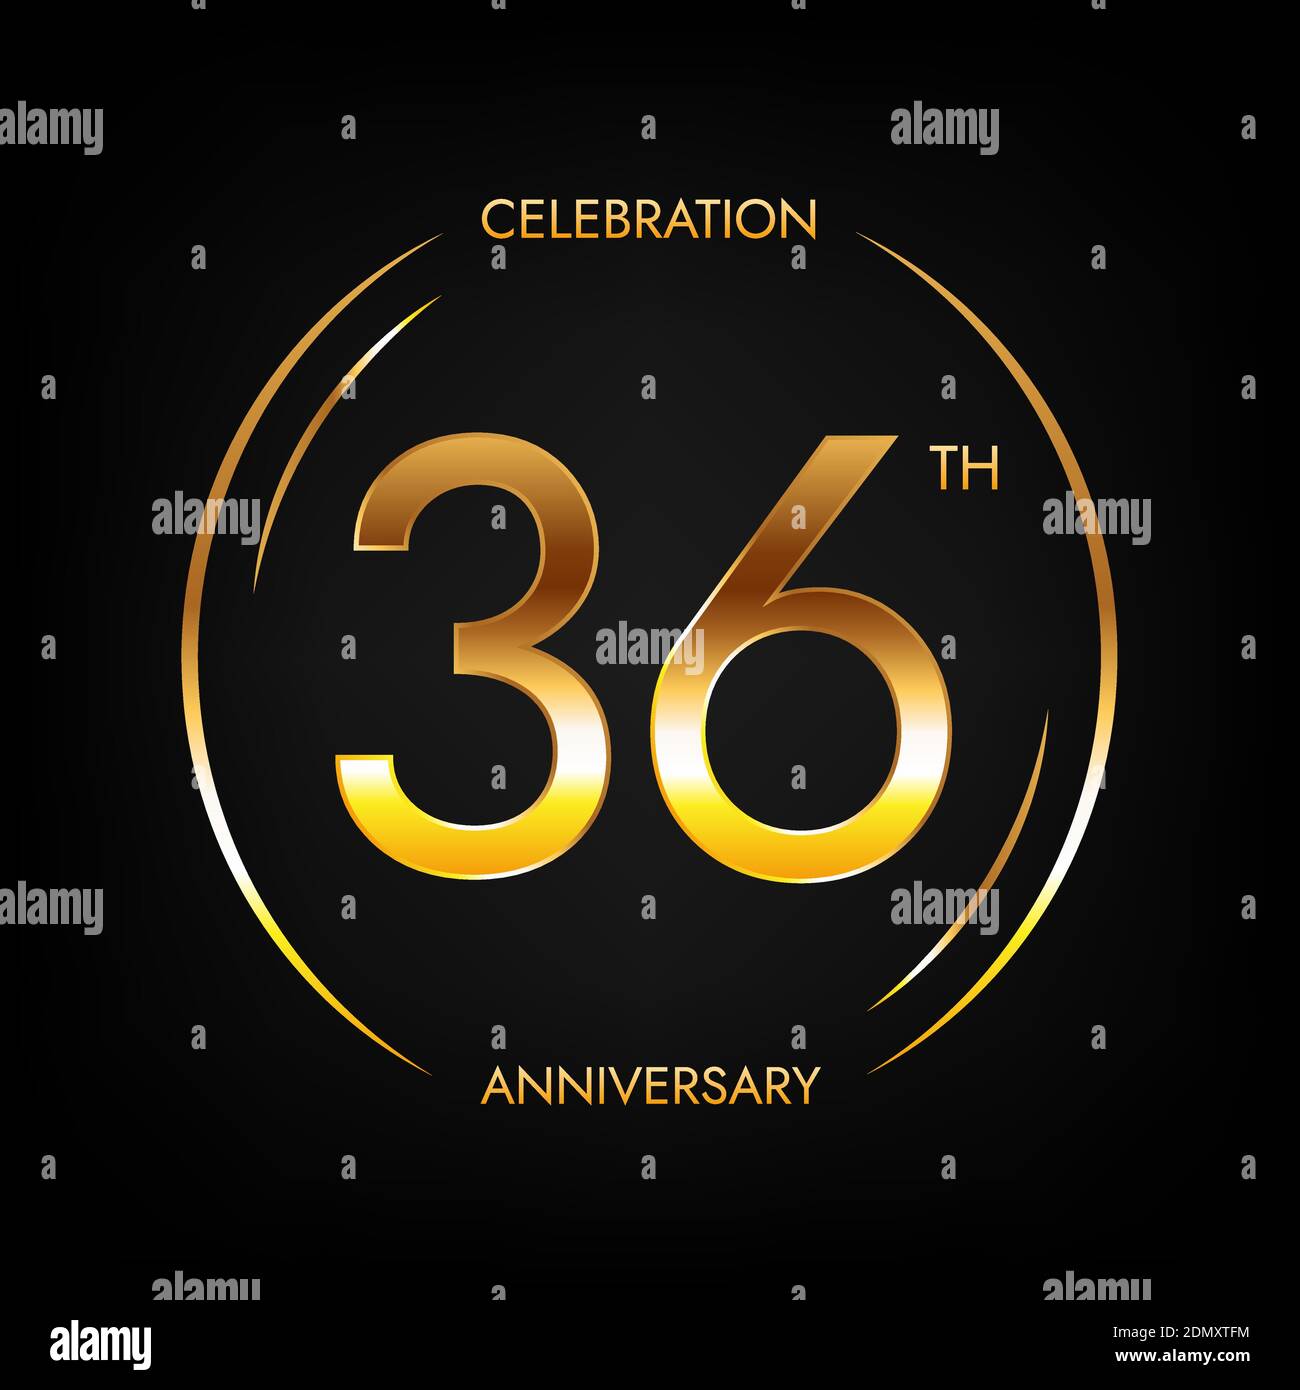 36th anniversary. Thirty-six years birthday celebration banner in bright golden color. Circular logo with elegant number design. Stock Vector